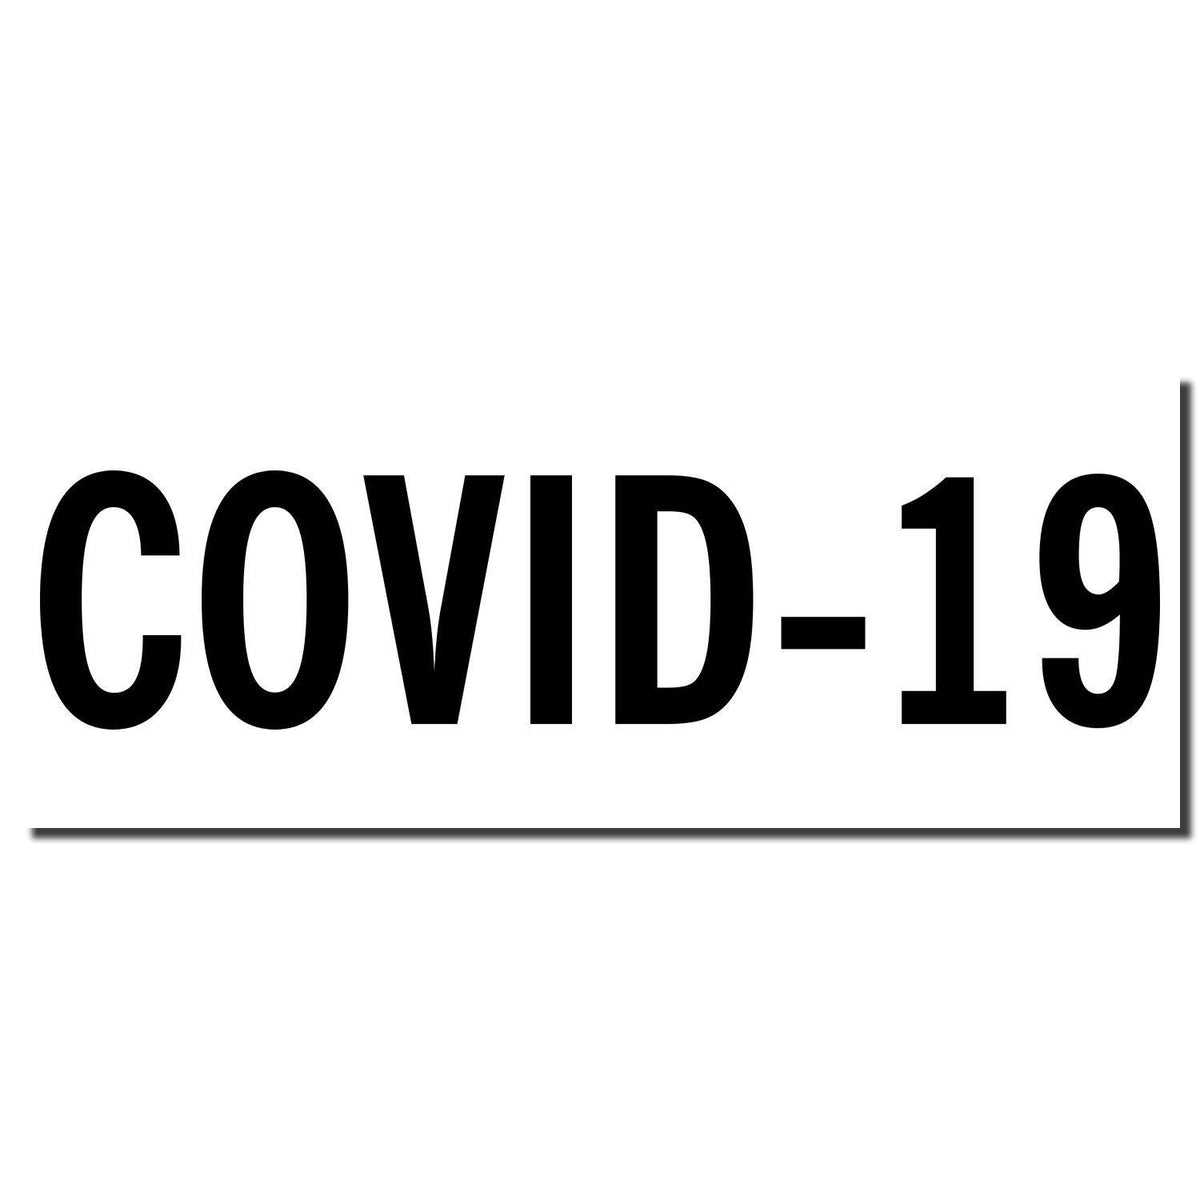 Slim Pre-Inked Bold Covid-19 Stamp - Engineer Seal Stamps - Brand_Slim, Impression Size_Small, Stamp Type_Pre-Inked Stamp, Type of Use_Medical Office